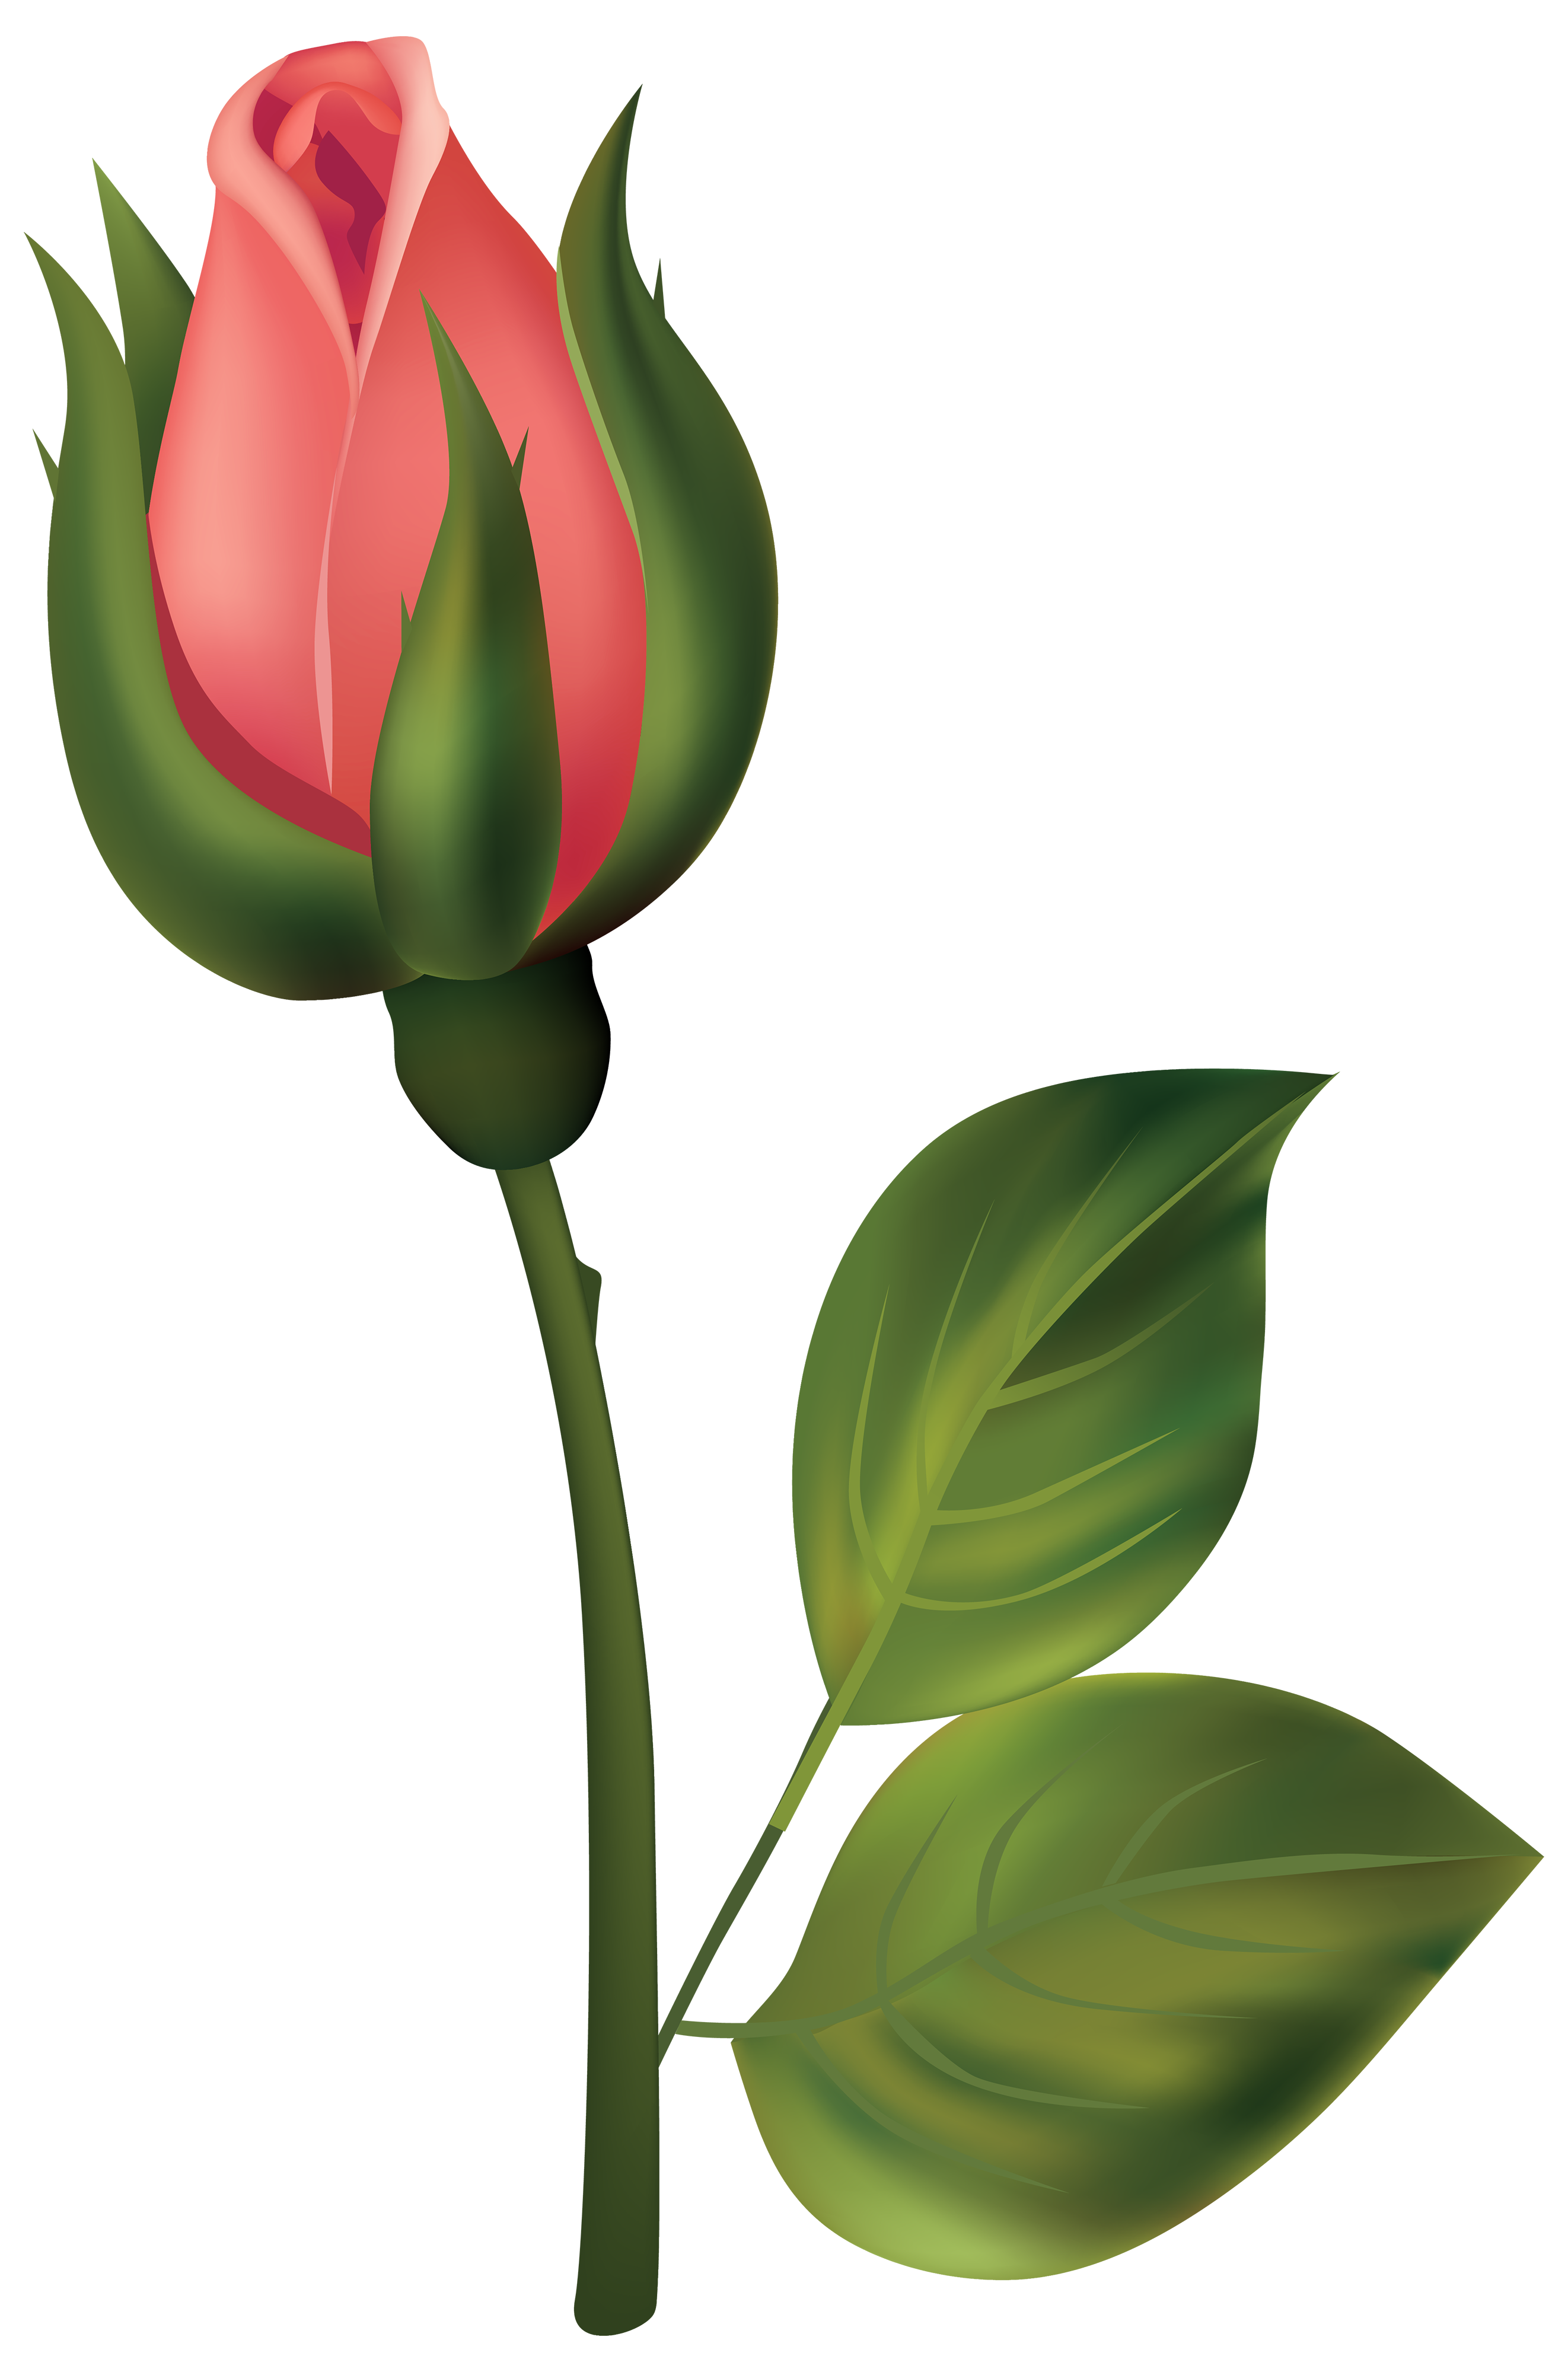 clipart tree buds - photo #18